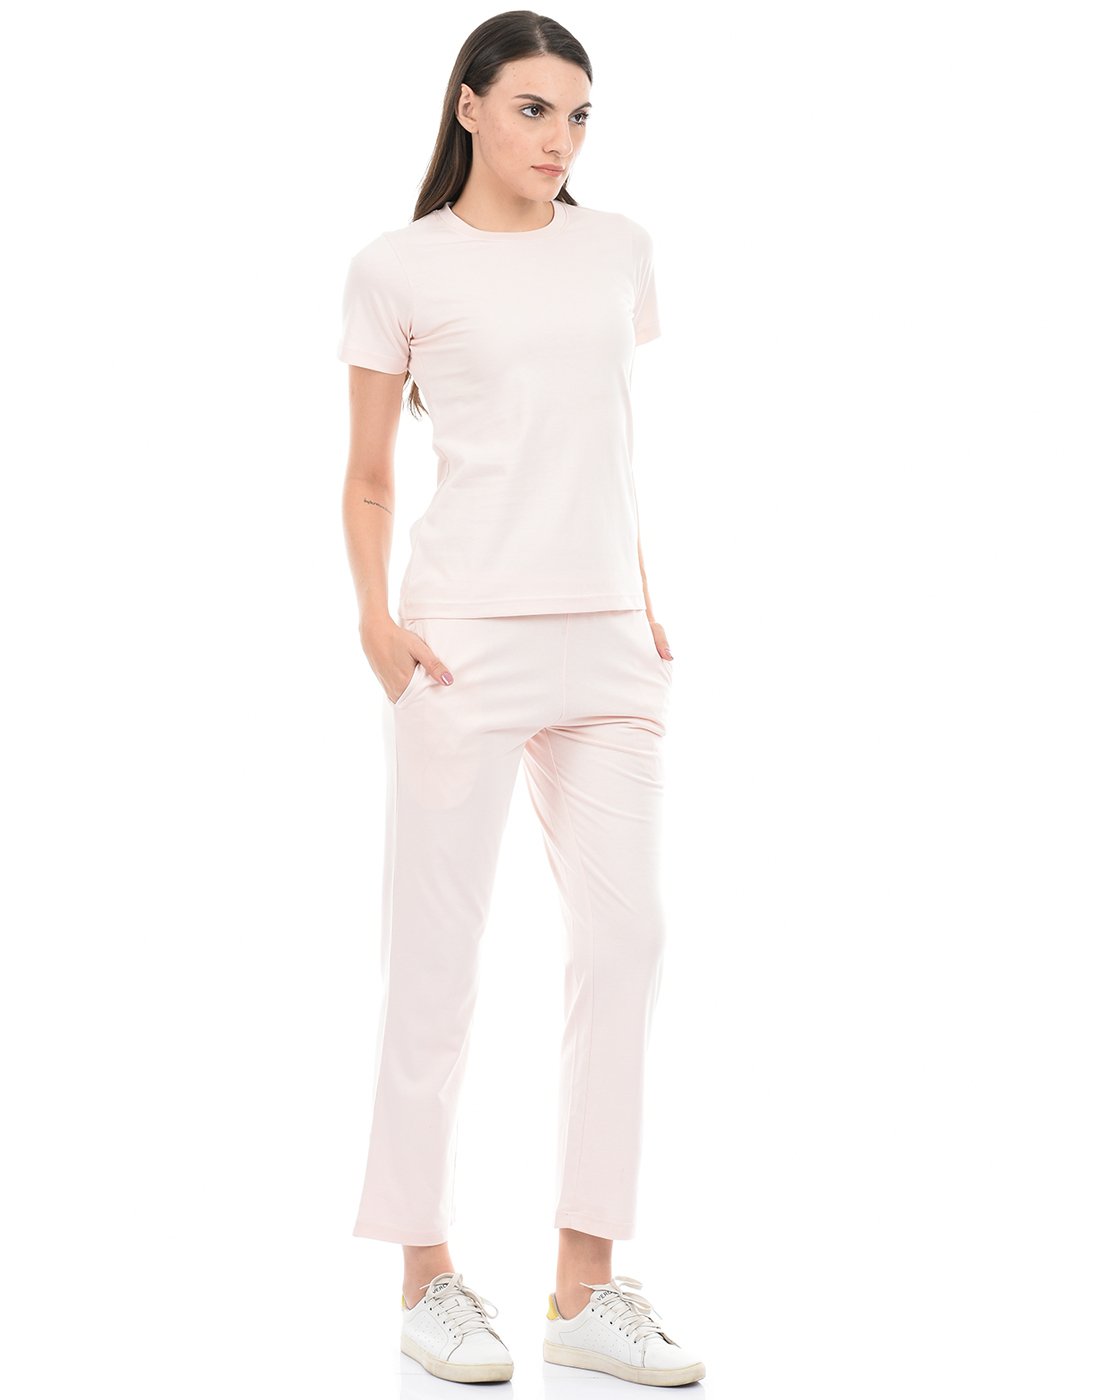 ONEWAY Round Neck Half Sleeves Solid Night Suit for Women|100% Cotton|Comfort Fit|Women's Comfortable PJ'S|Night Wear